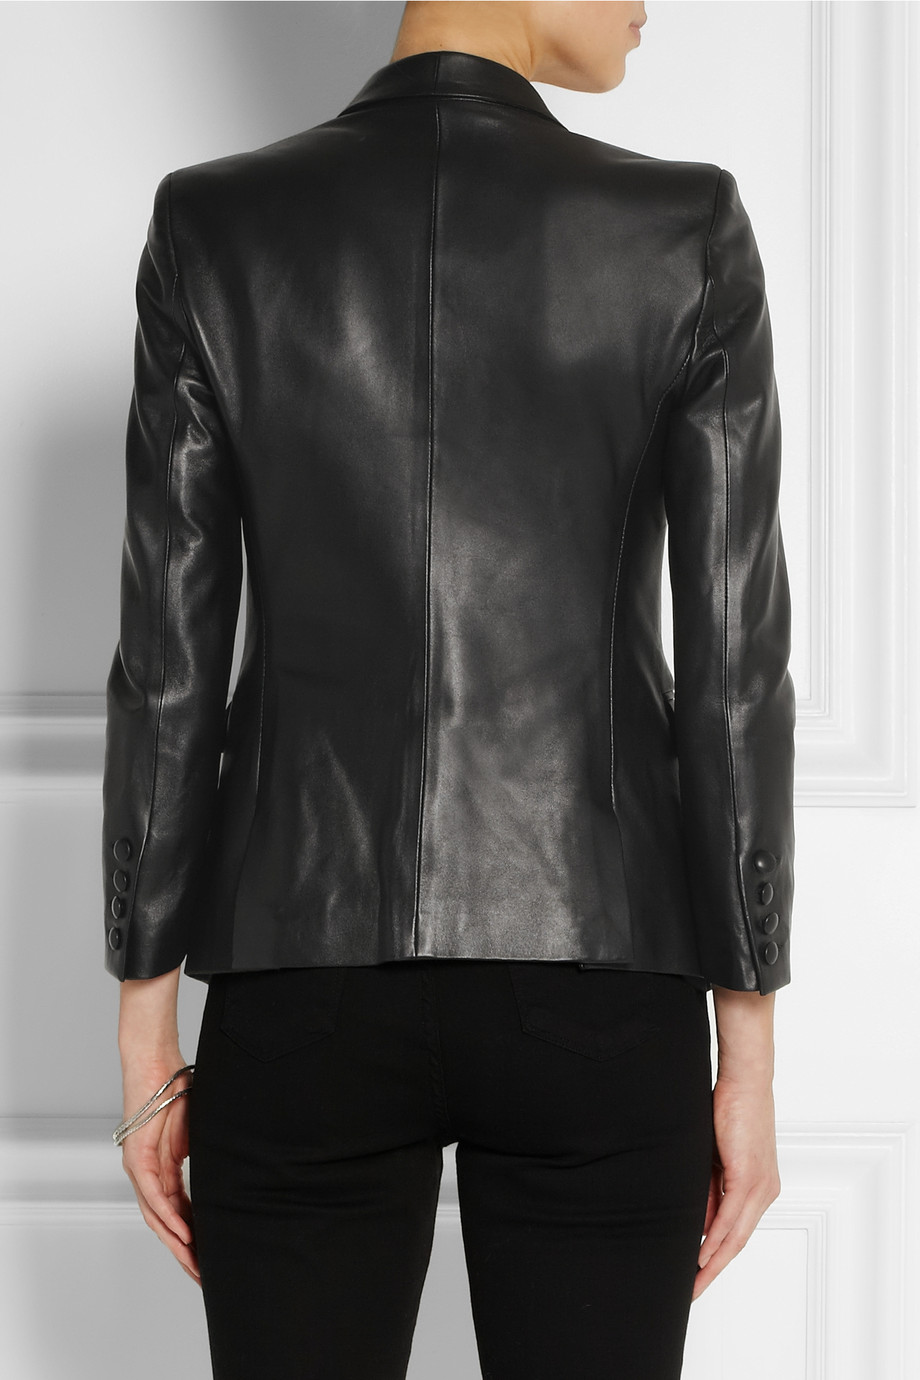 Band of outsiders Leather Blazer in Black | Lyst